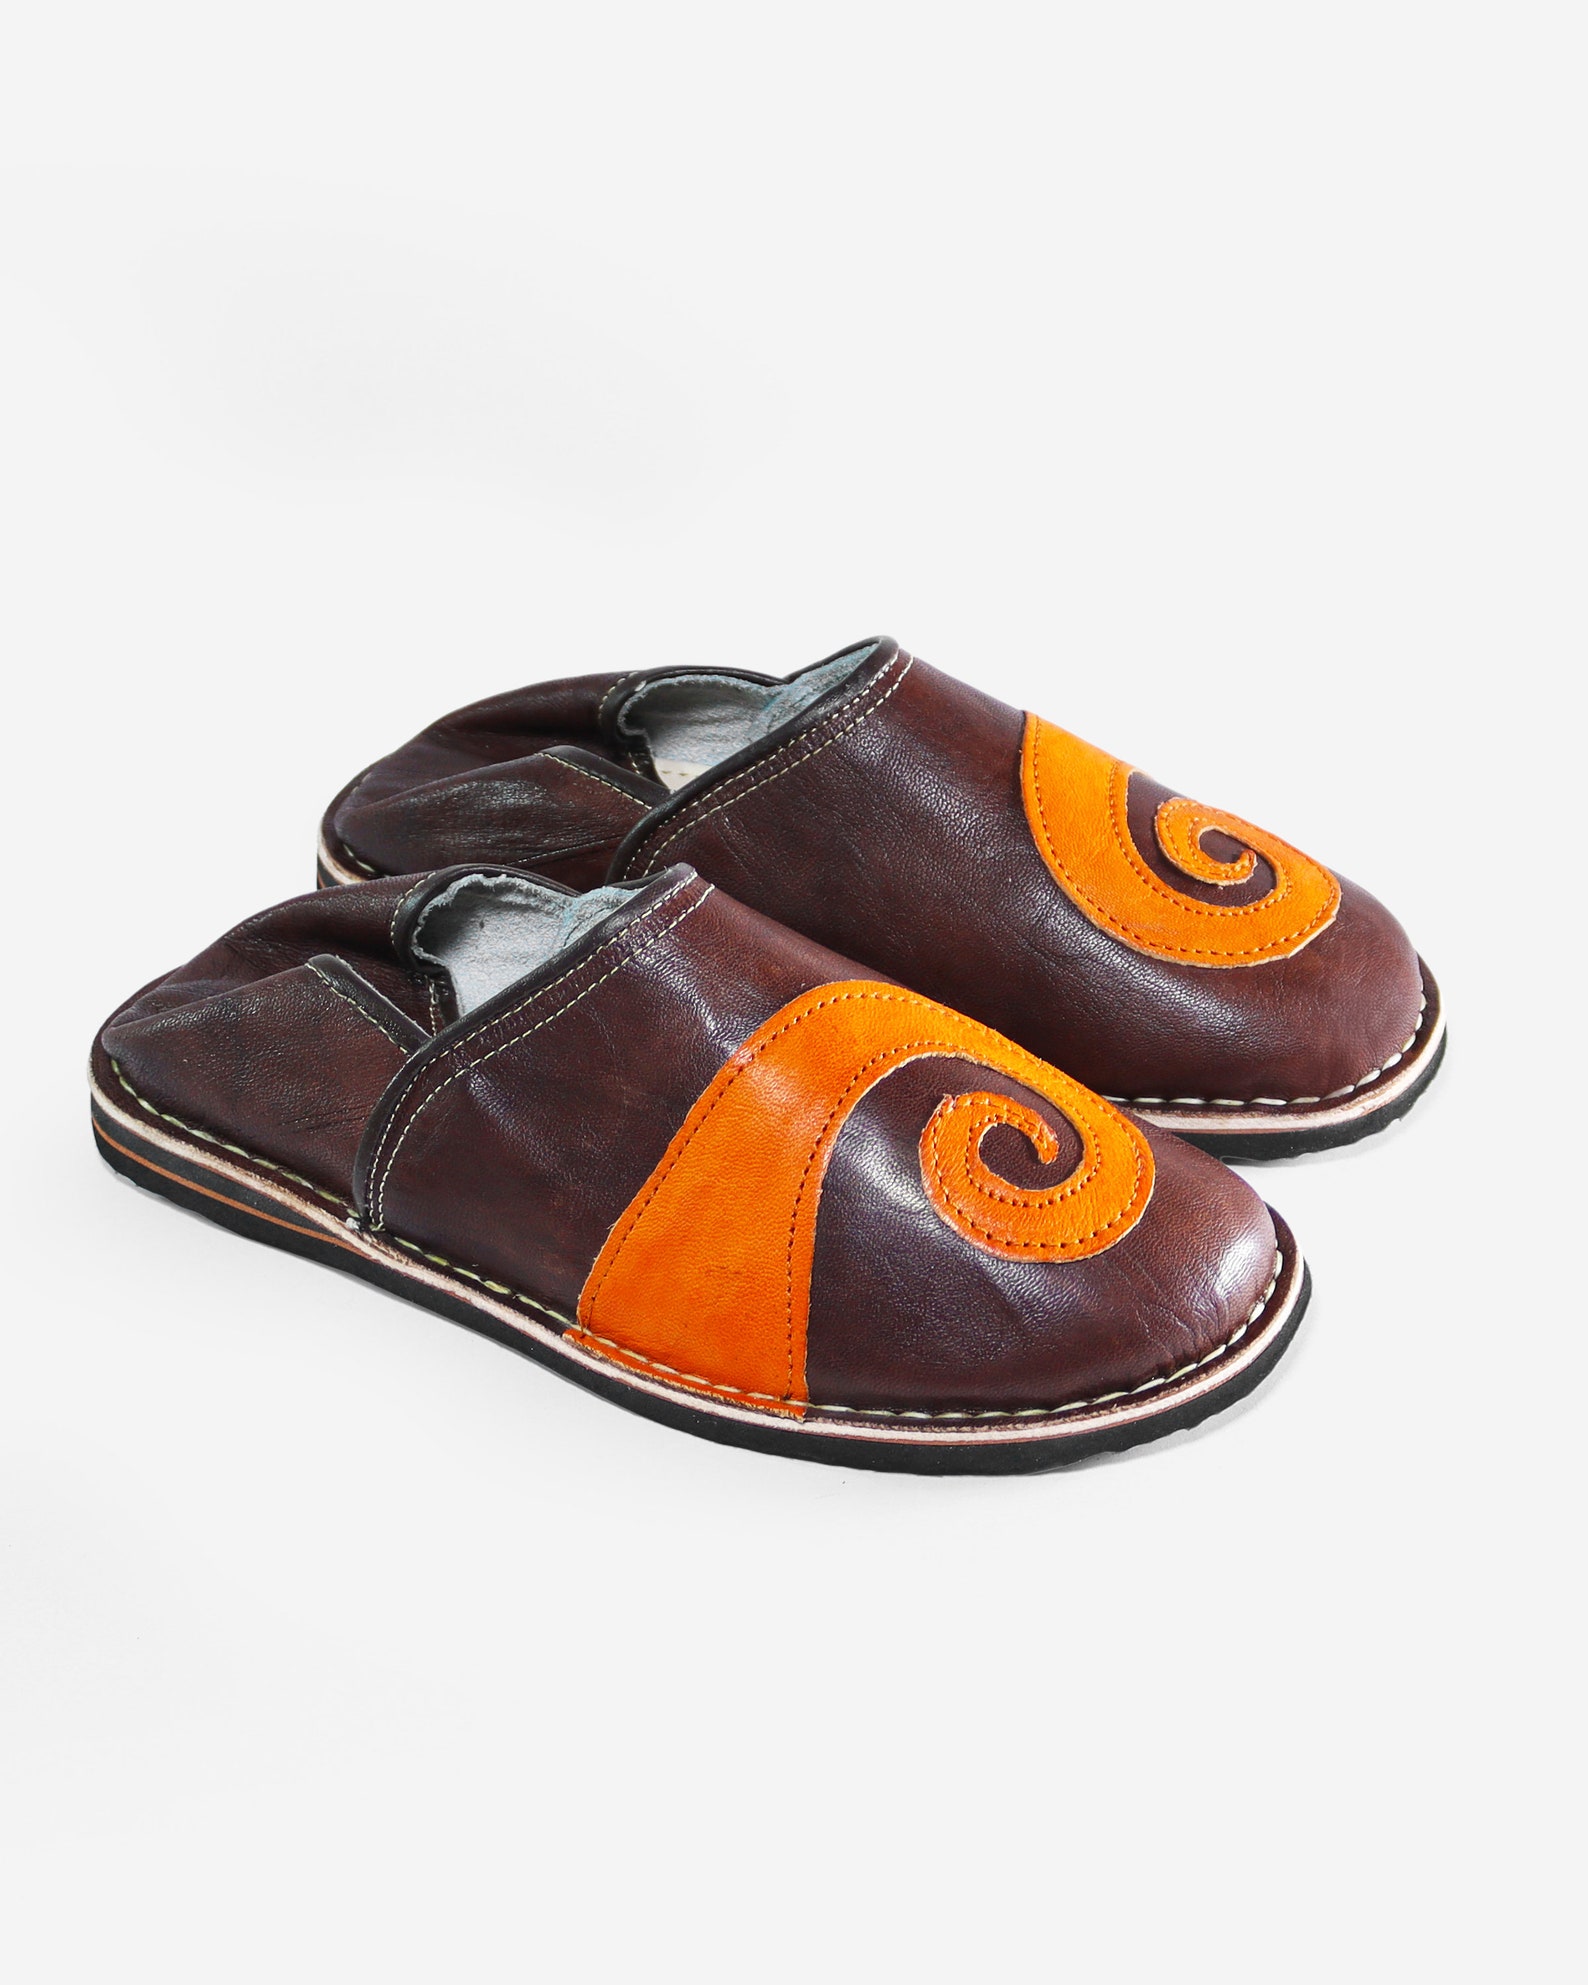 Babouche Shoe Moroccan Babouches Snail Morocco Leather - Etsy